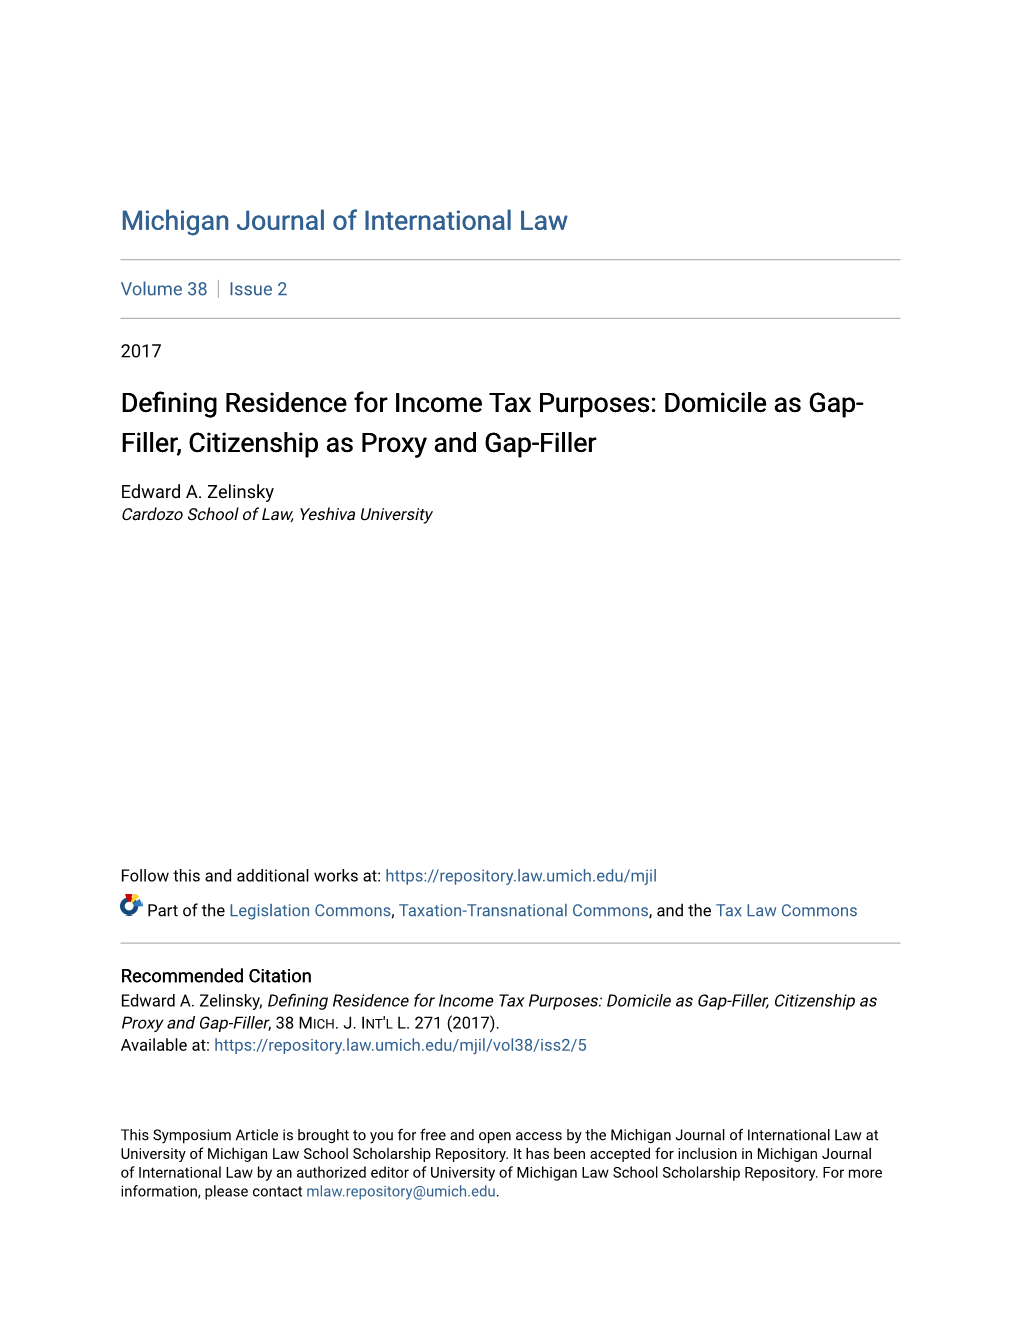 Defining Residence for Income Tax Purposes: Domicile As Gap-Filler, Citizenship As Proxy and Gap-Filler